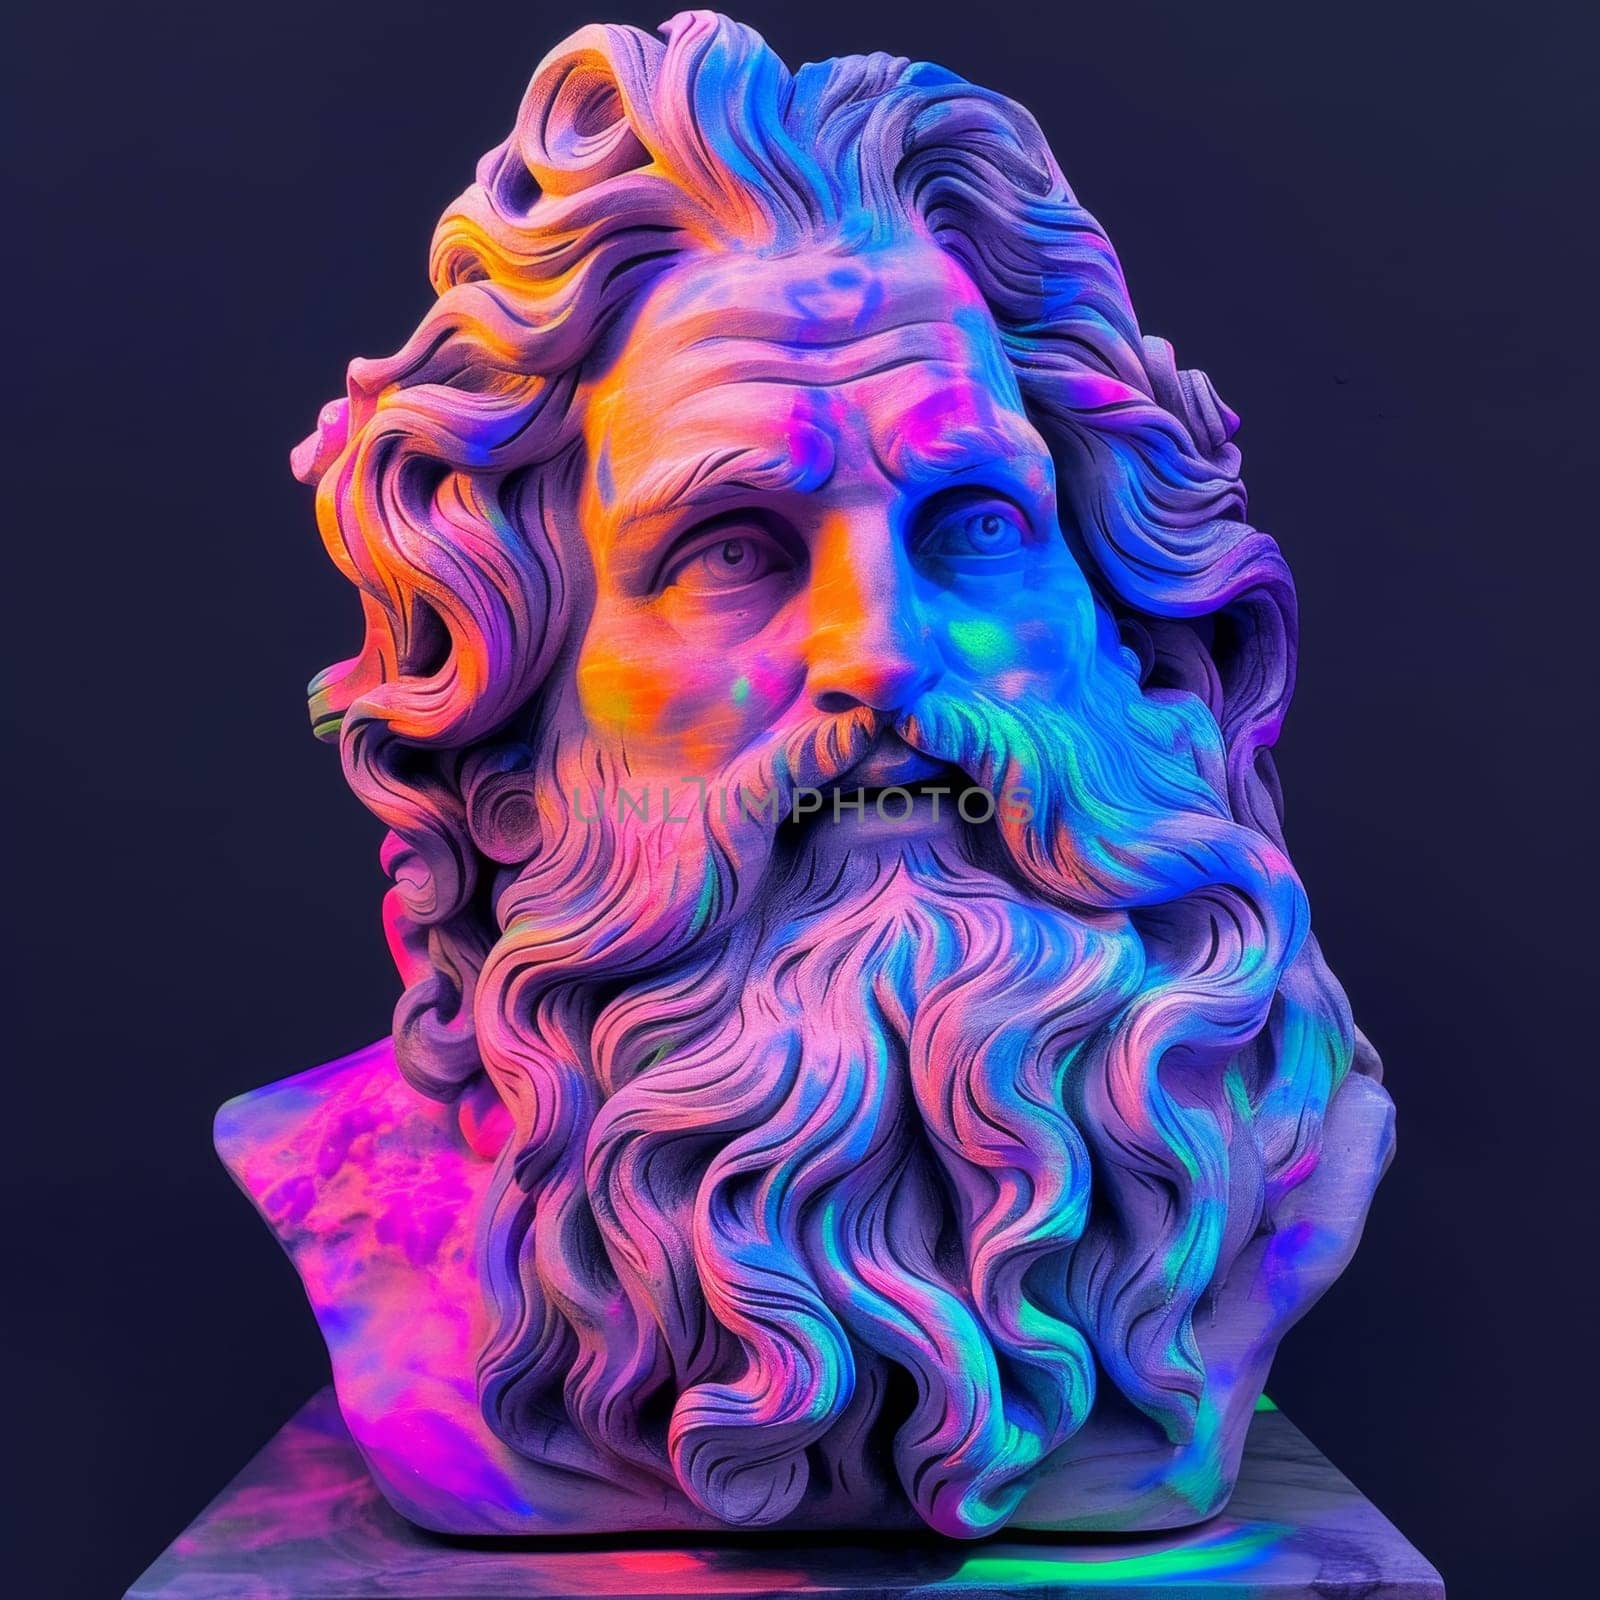 Greek sculpture bathed in cosmic neon lights, creating a surreal effect. by sfinks